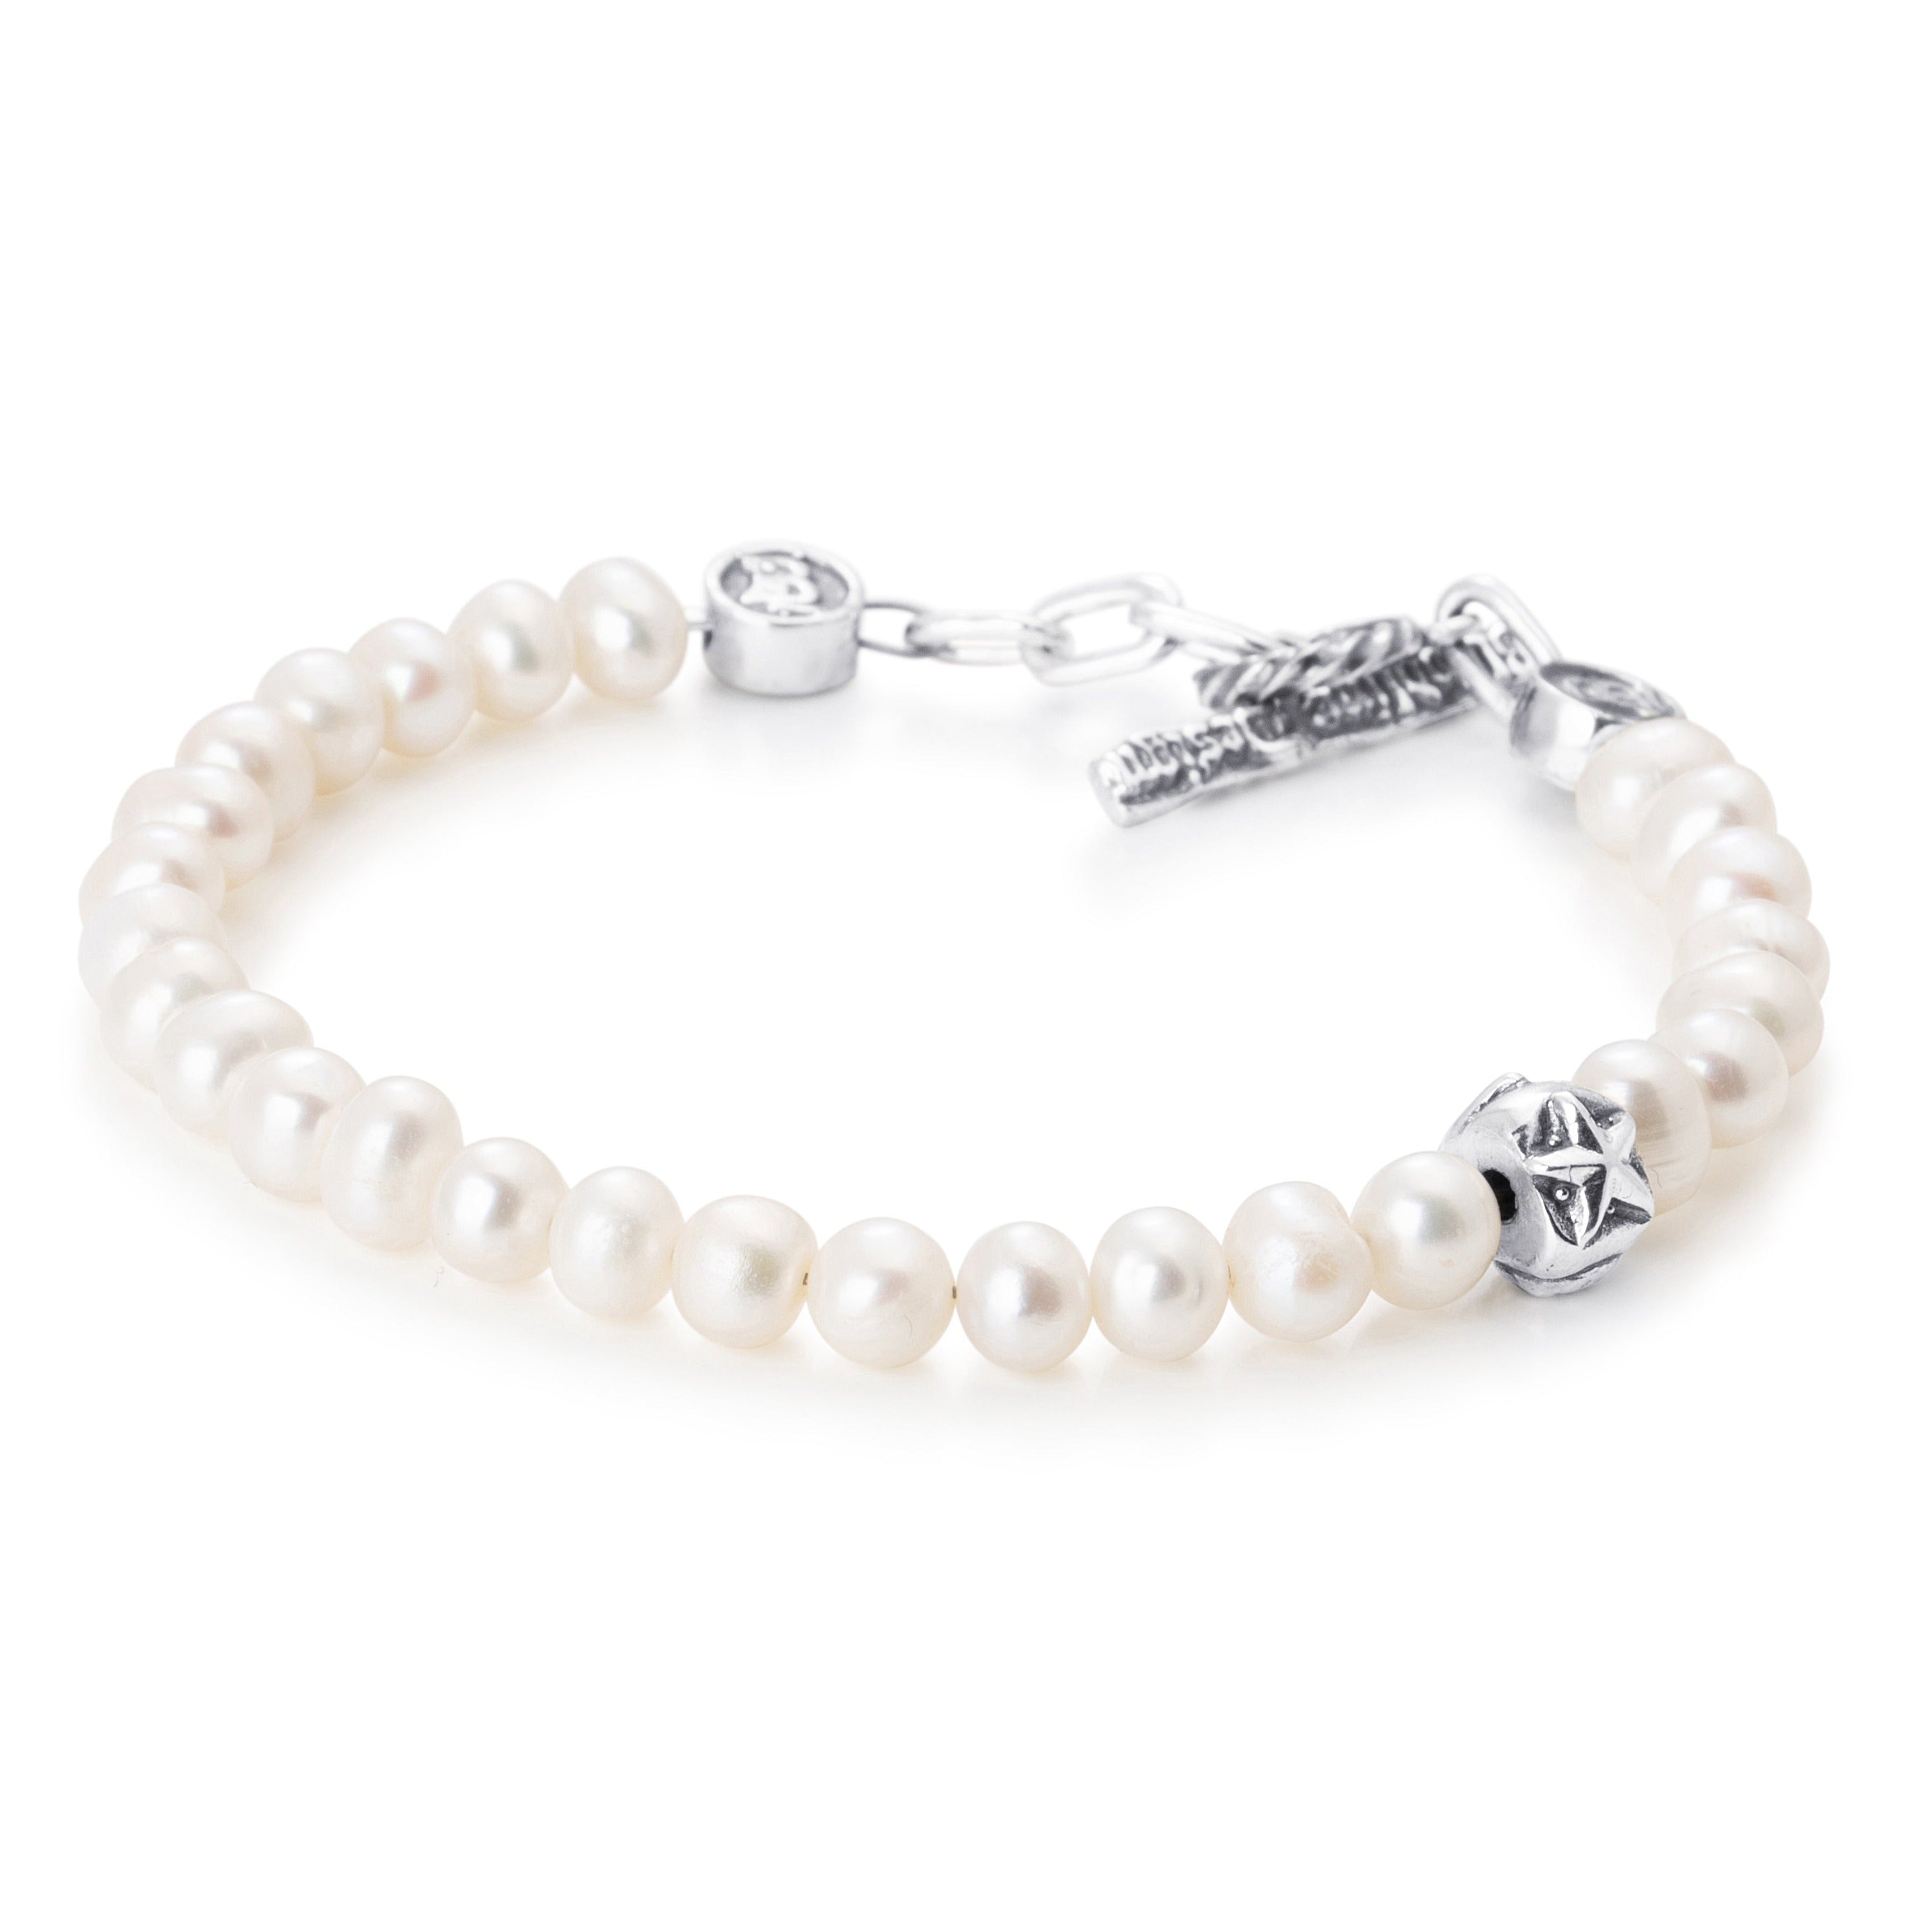 Pearls paired with a single sterling silver bead engraved with a heart star and skull on a stainless steel cable with Sterling silver T clasp.